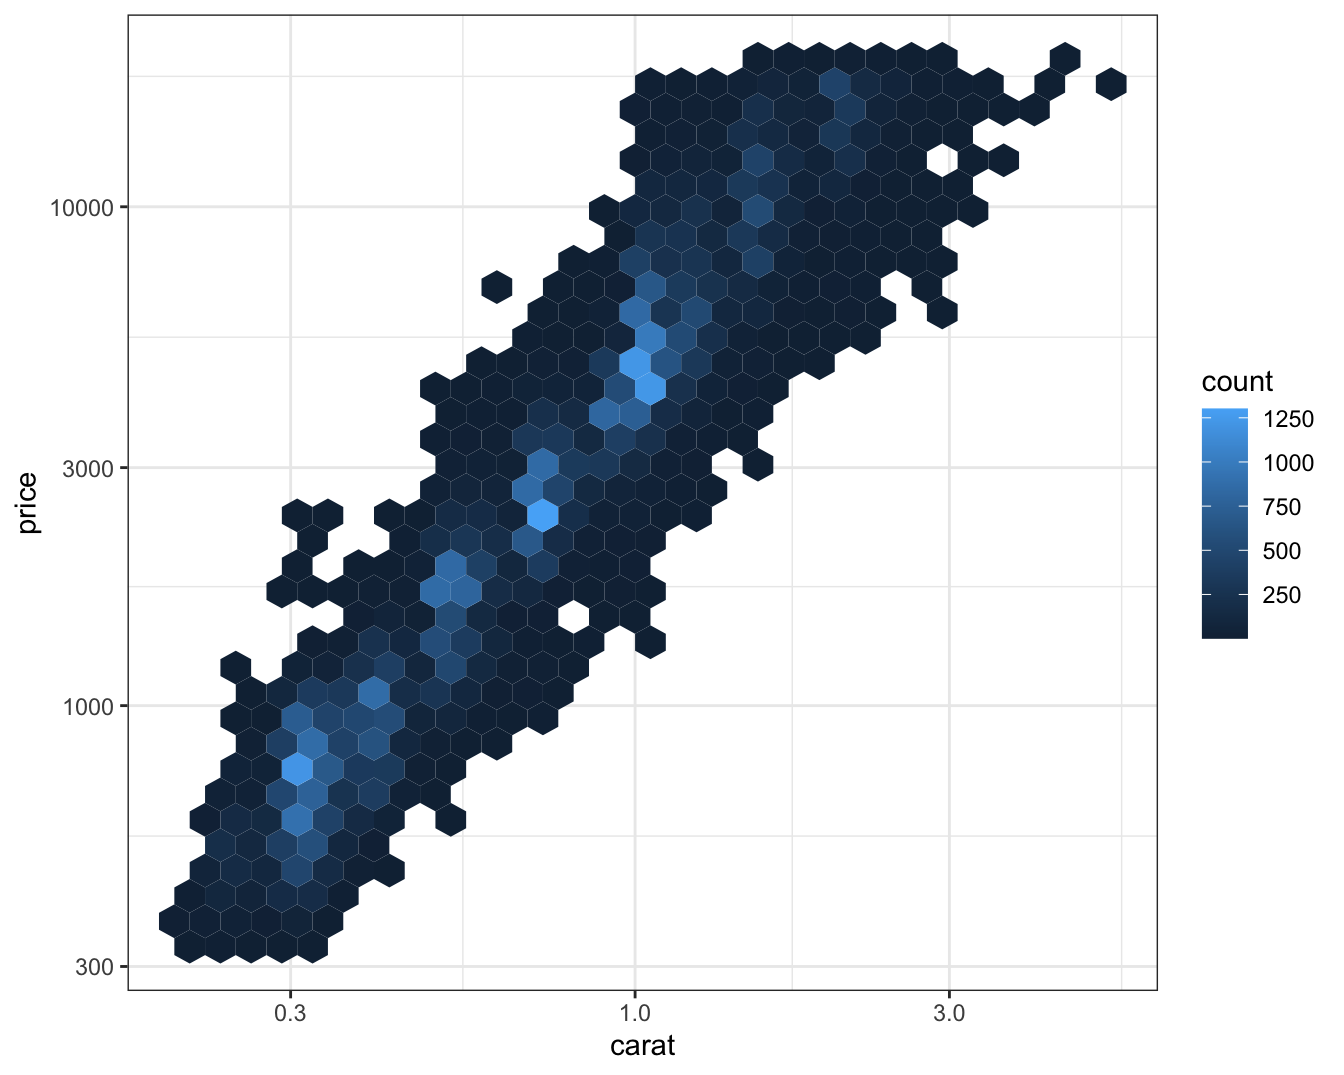 Plot of price versus carat of diamonds. Data binned and the color of
the rectangles representing each bin based on the number of points that
fall into that bin. The axis labels are on the original data scale.